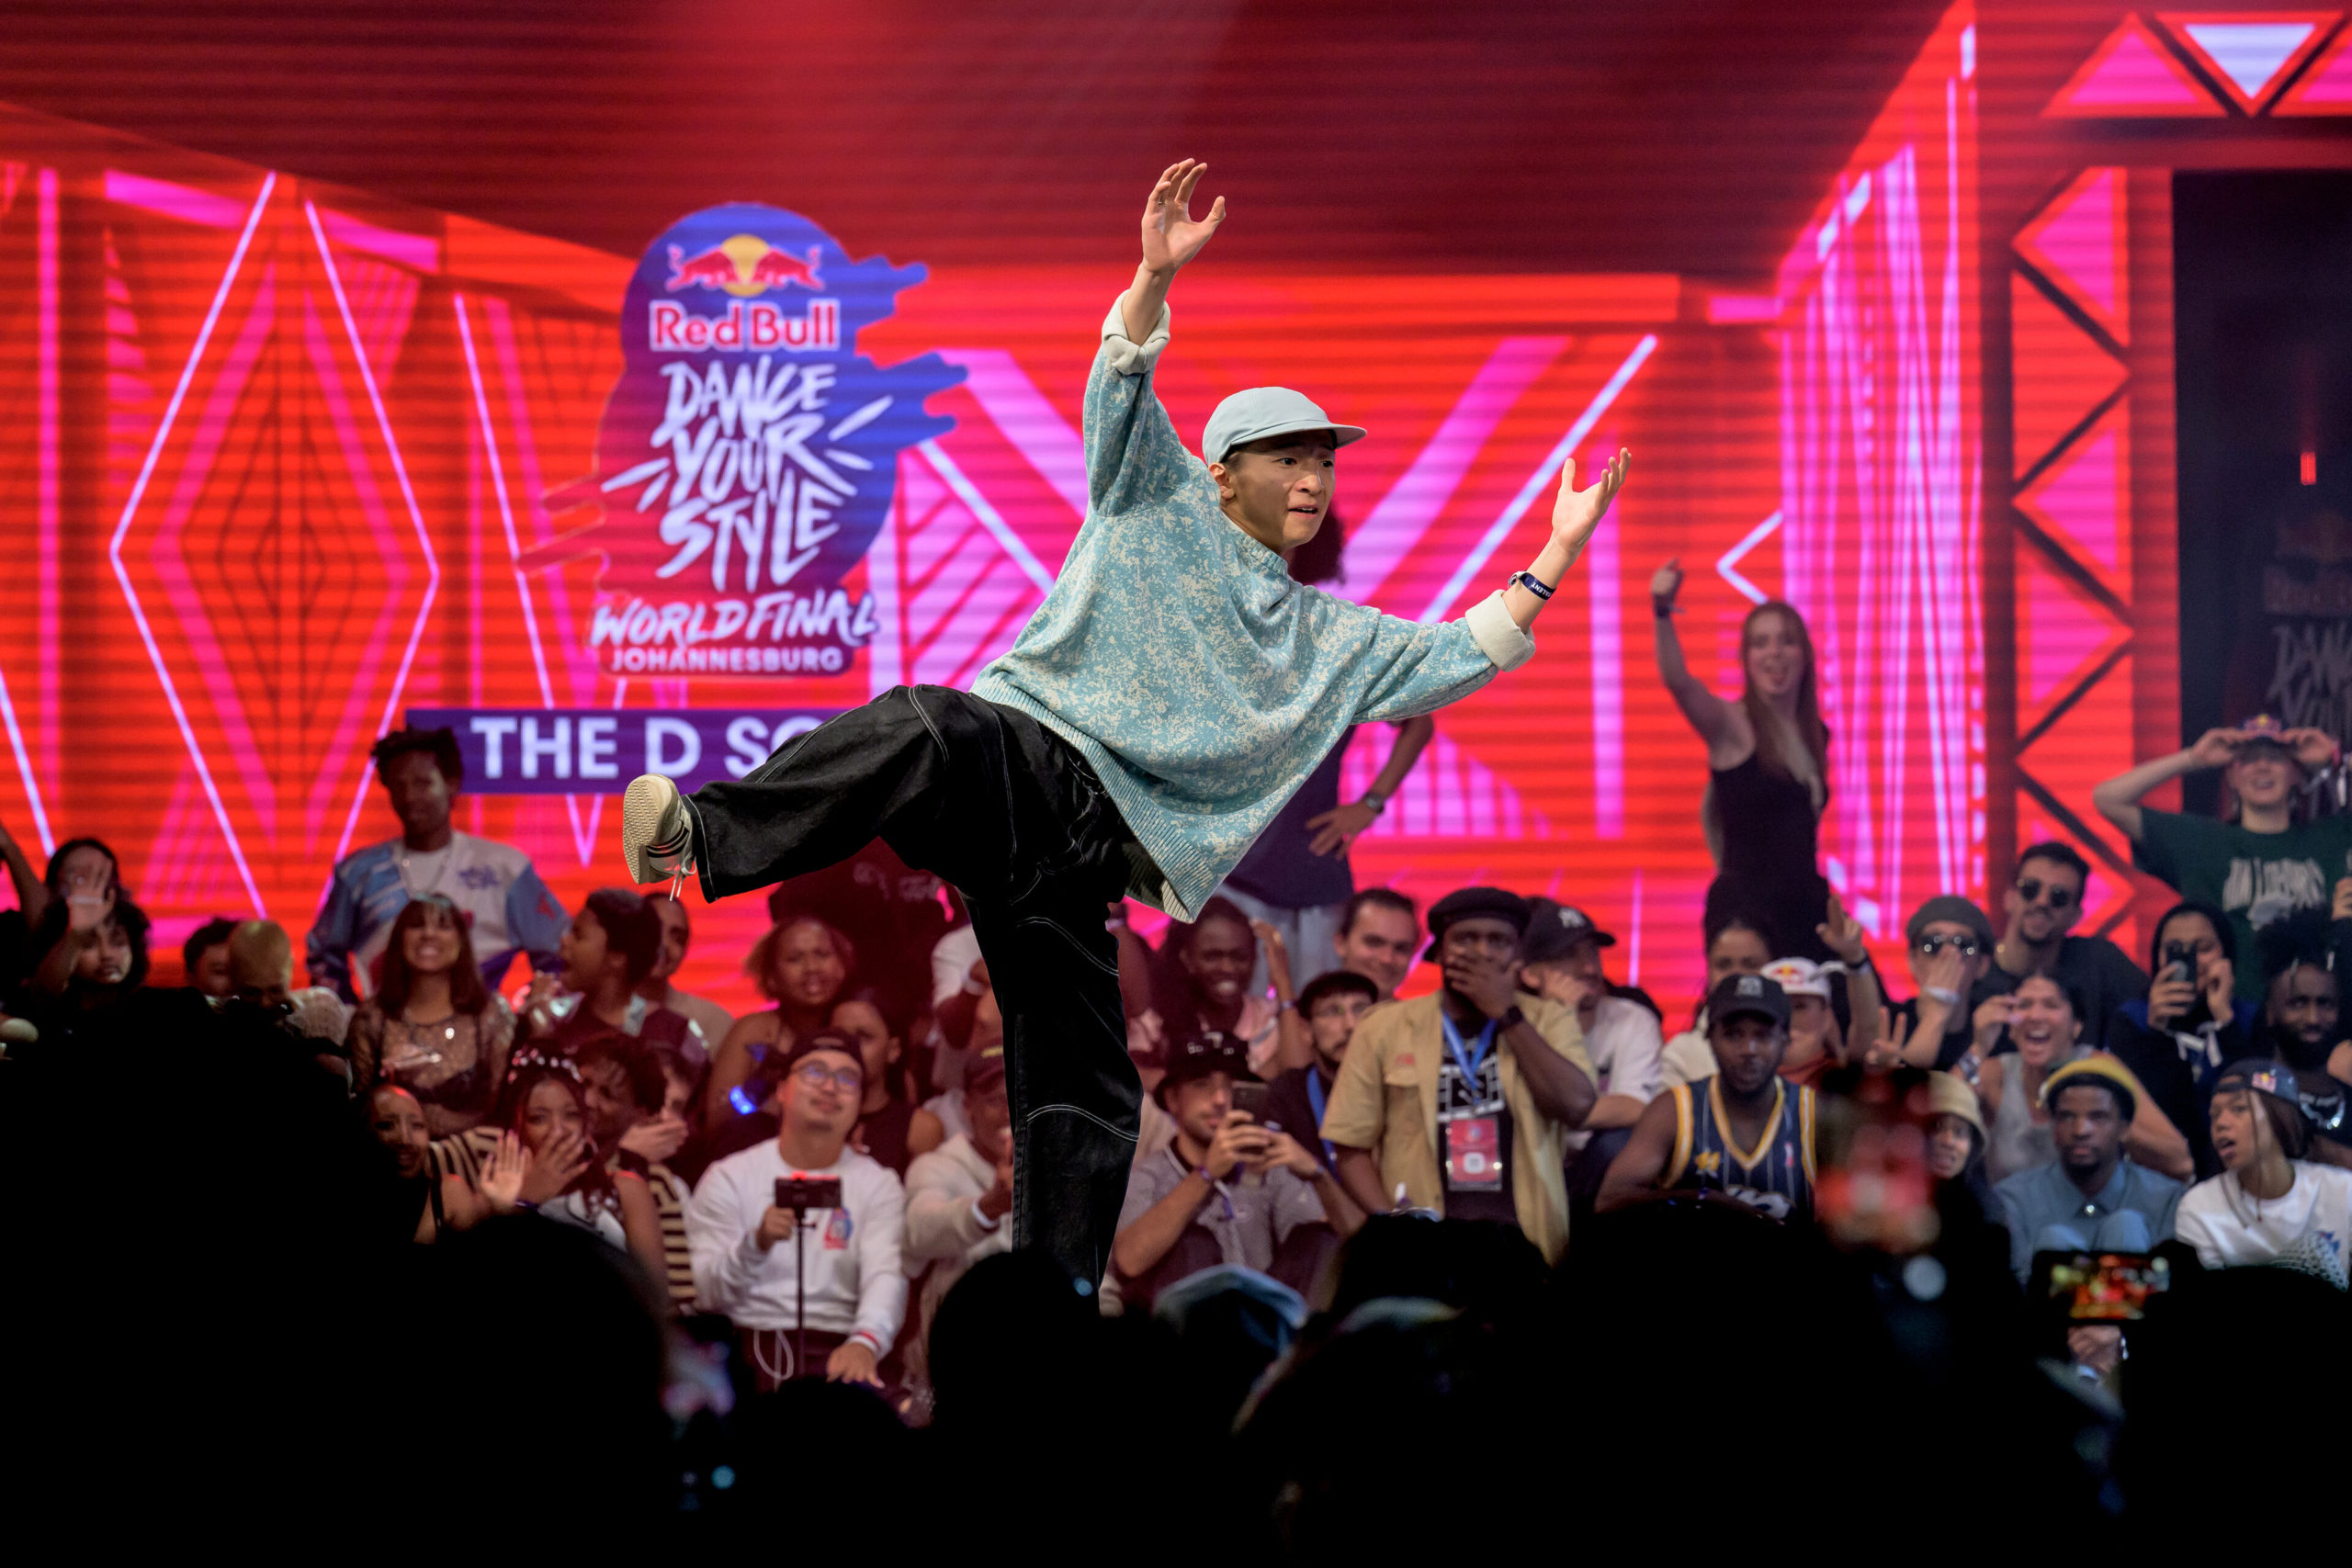 JAPAN'S THE D SORAKI CROWNED RED BULL DANCE YOUR STYLE WORLD CHAMPION